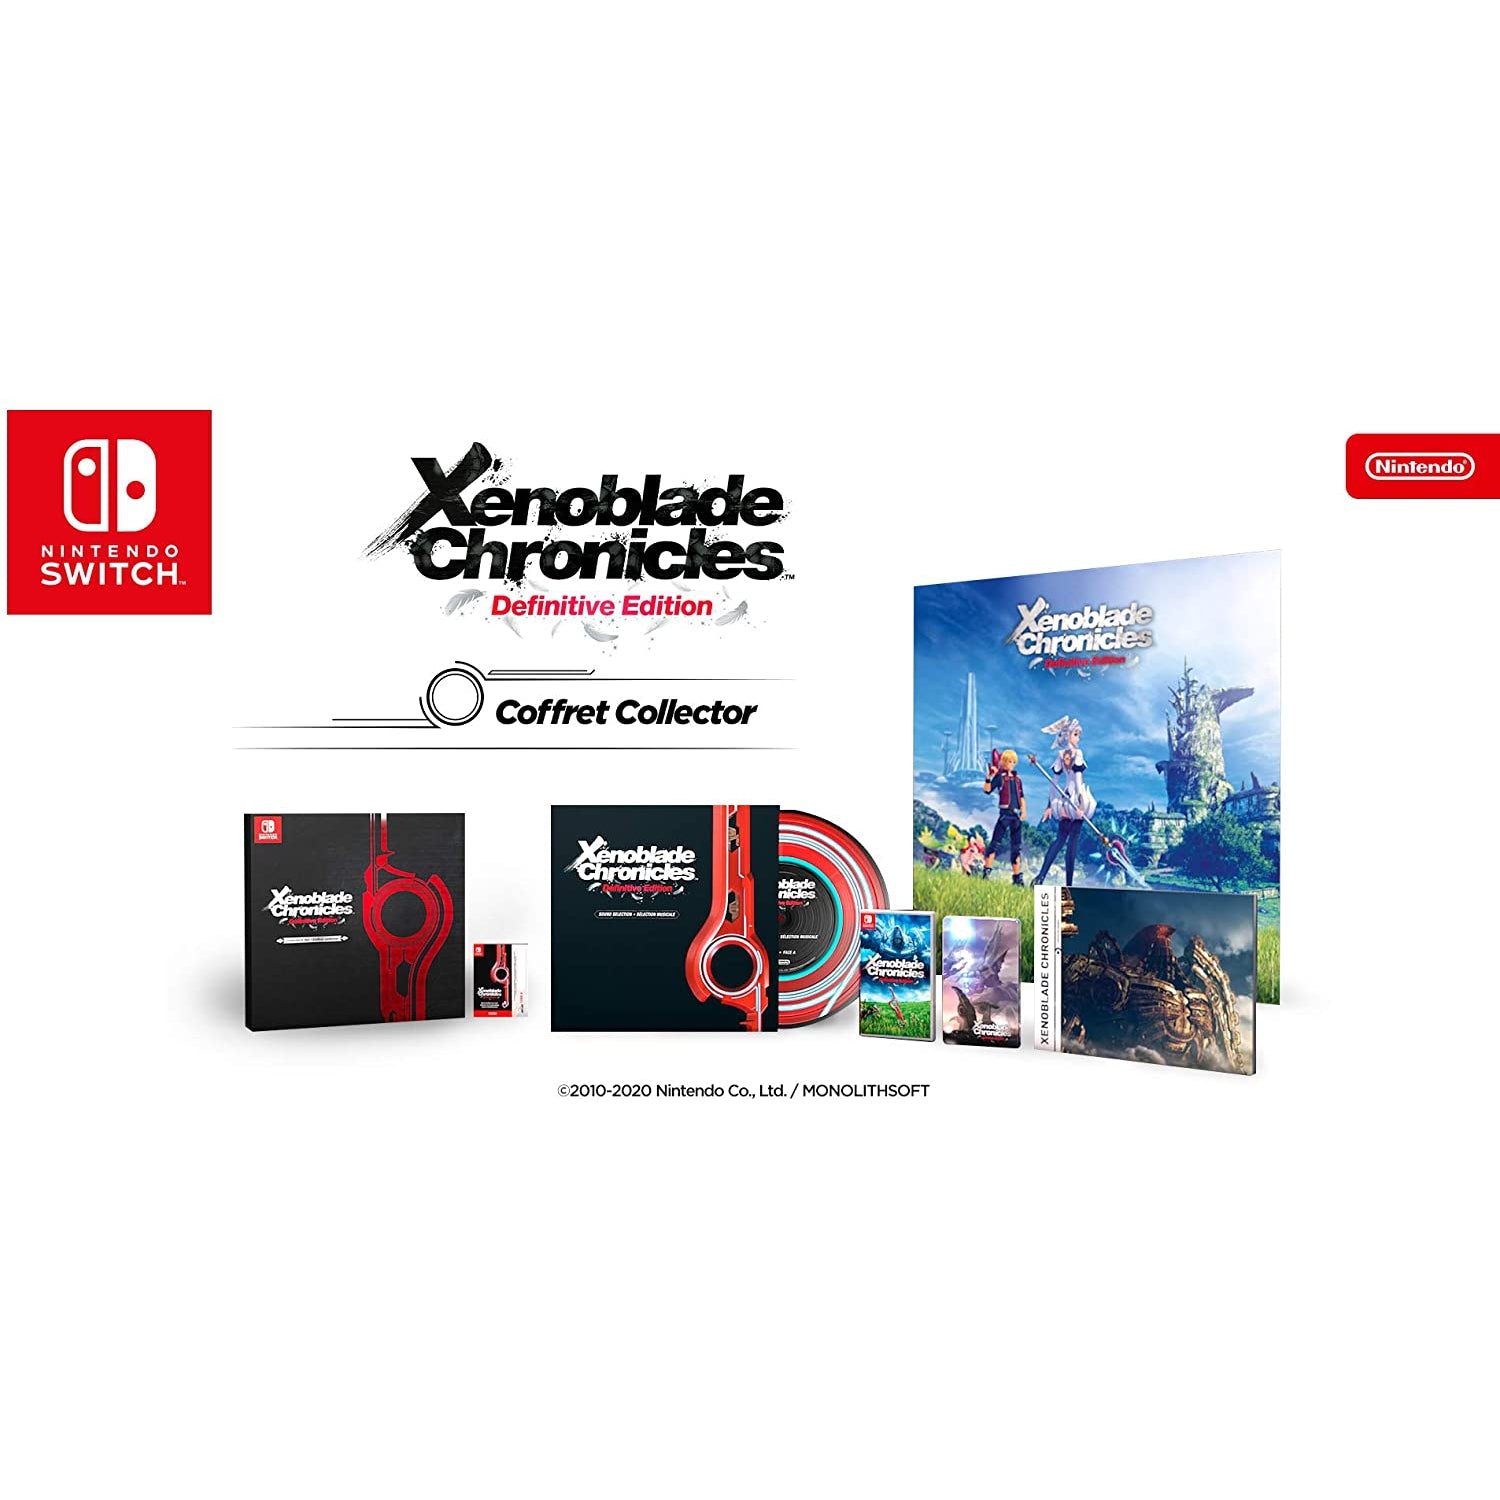 Xenoblade Chronicles: Definitive Edition Collector's Set for Nintendo Switch